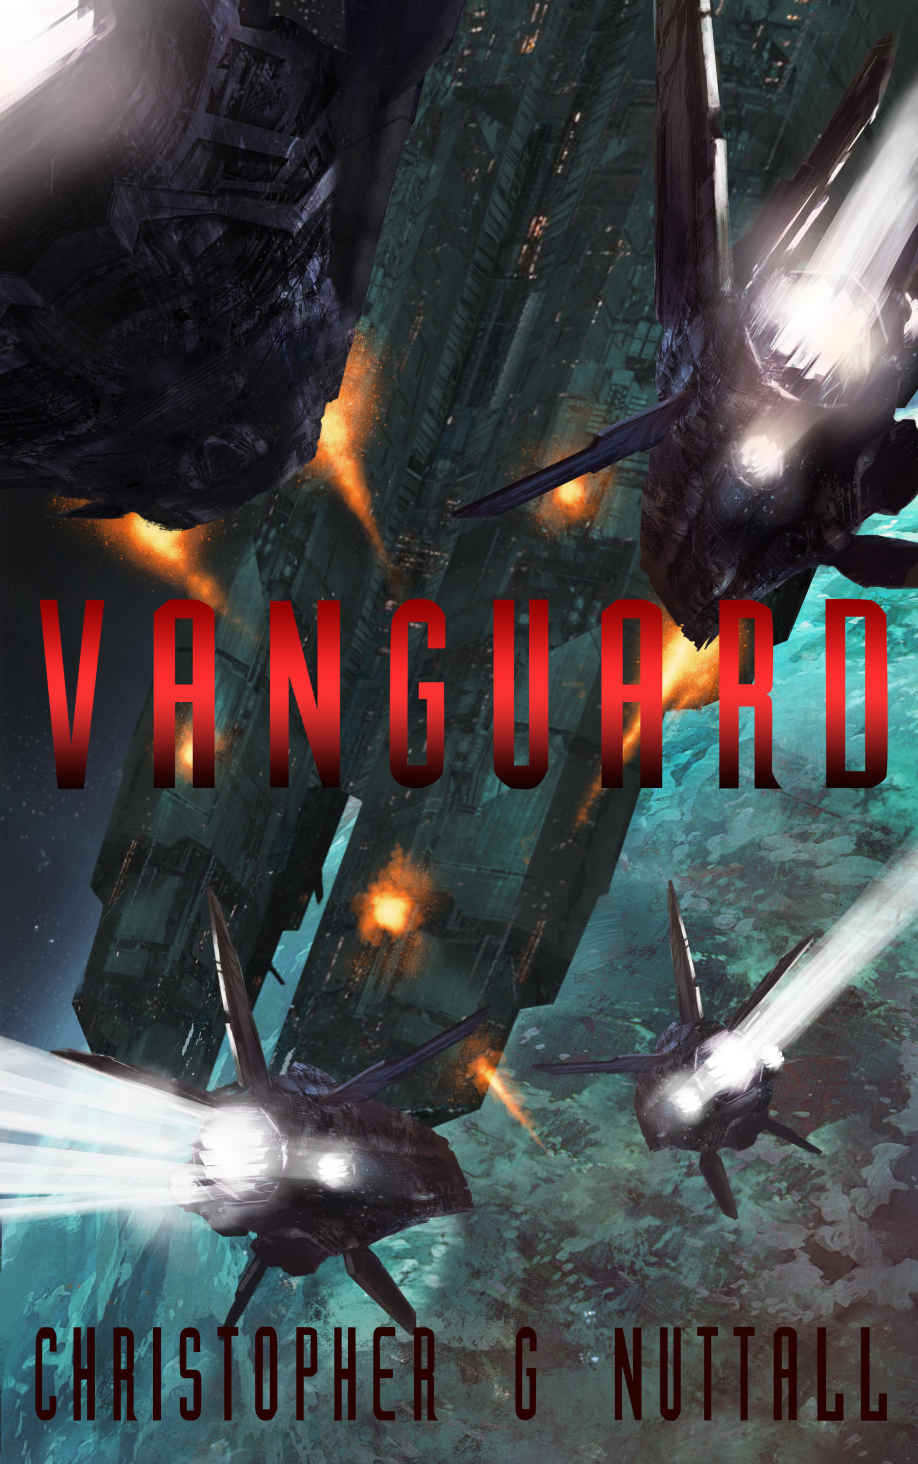 Vanguard (Ark Royal Book 7) by Christopher Nuttall